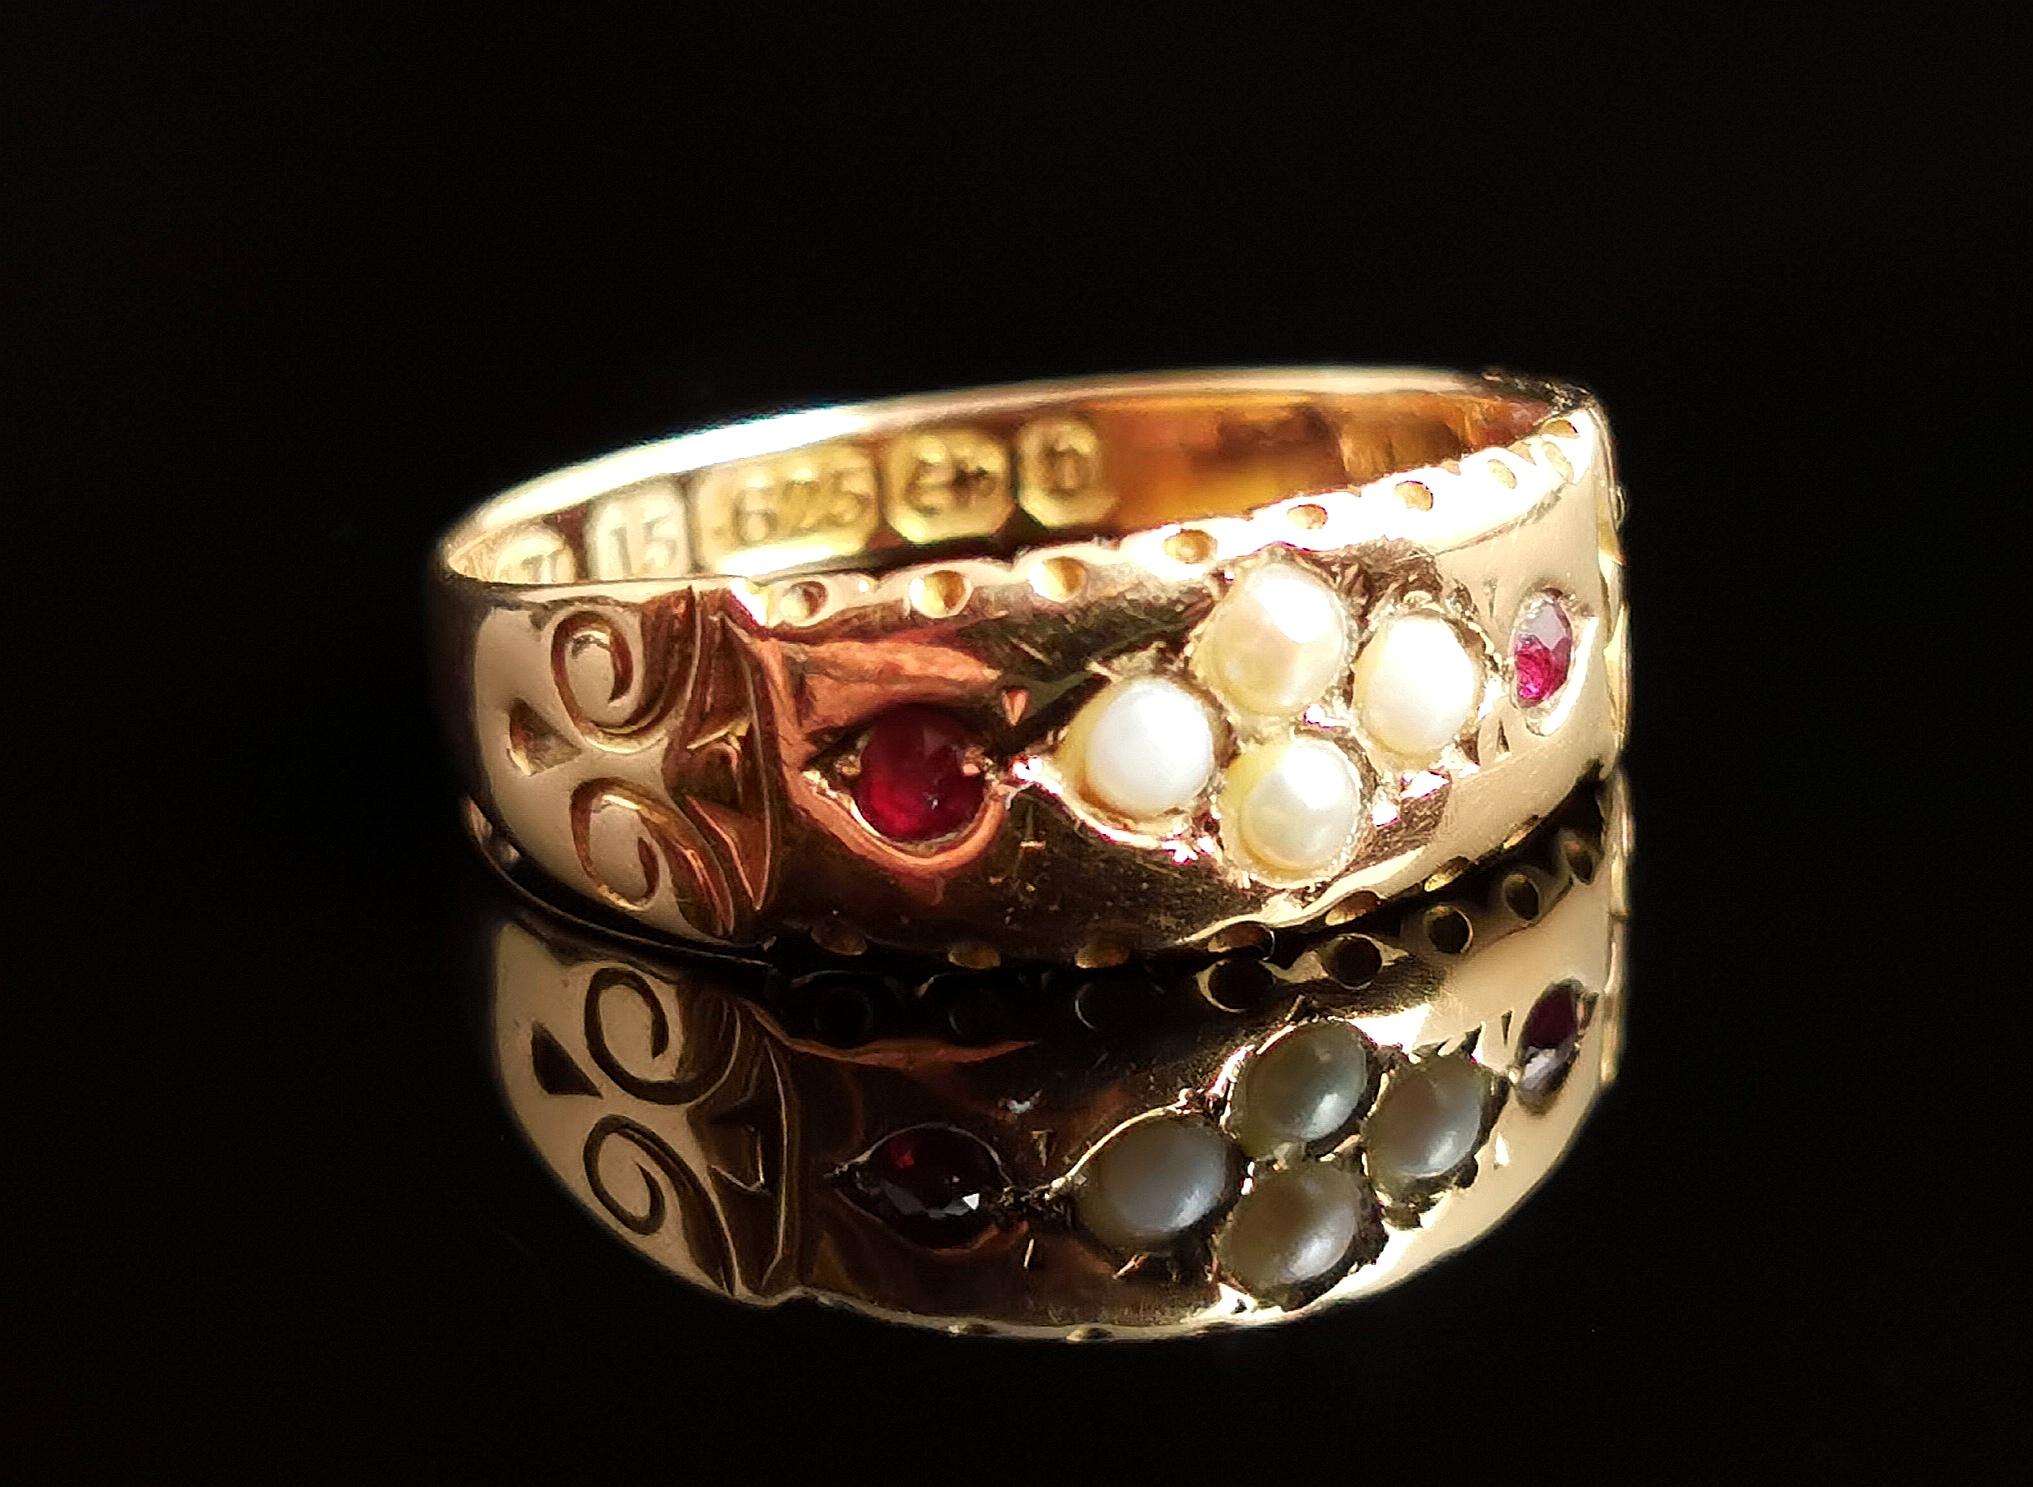 A pretty antique, Victorian era 15kt gold and pearl ring.

It is nicely designed and is a fancy take on the band ring with a wider front, gem set with two rubies and a four seed pearl centre.

The pearls are arranged in a diamond shape and one